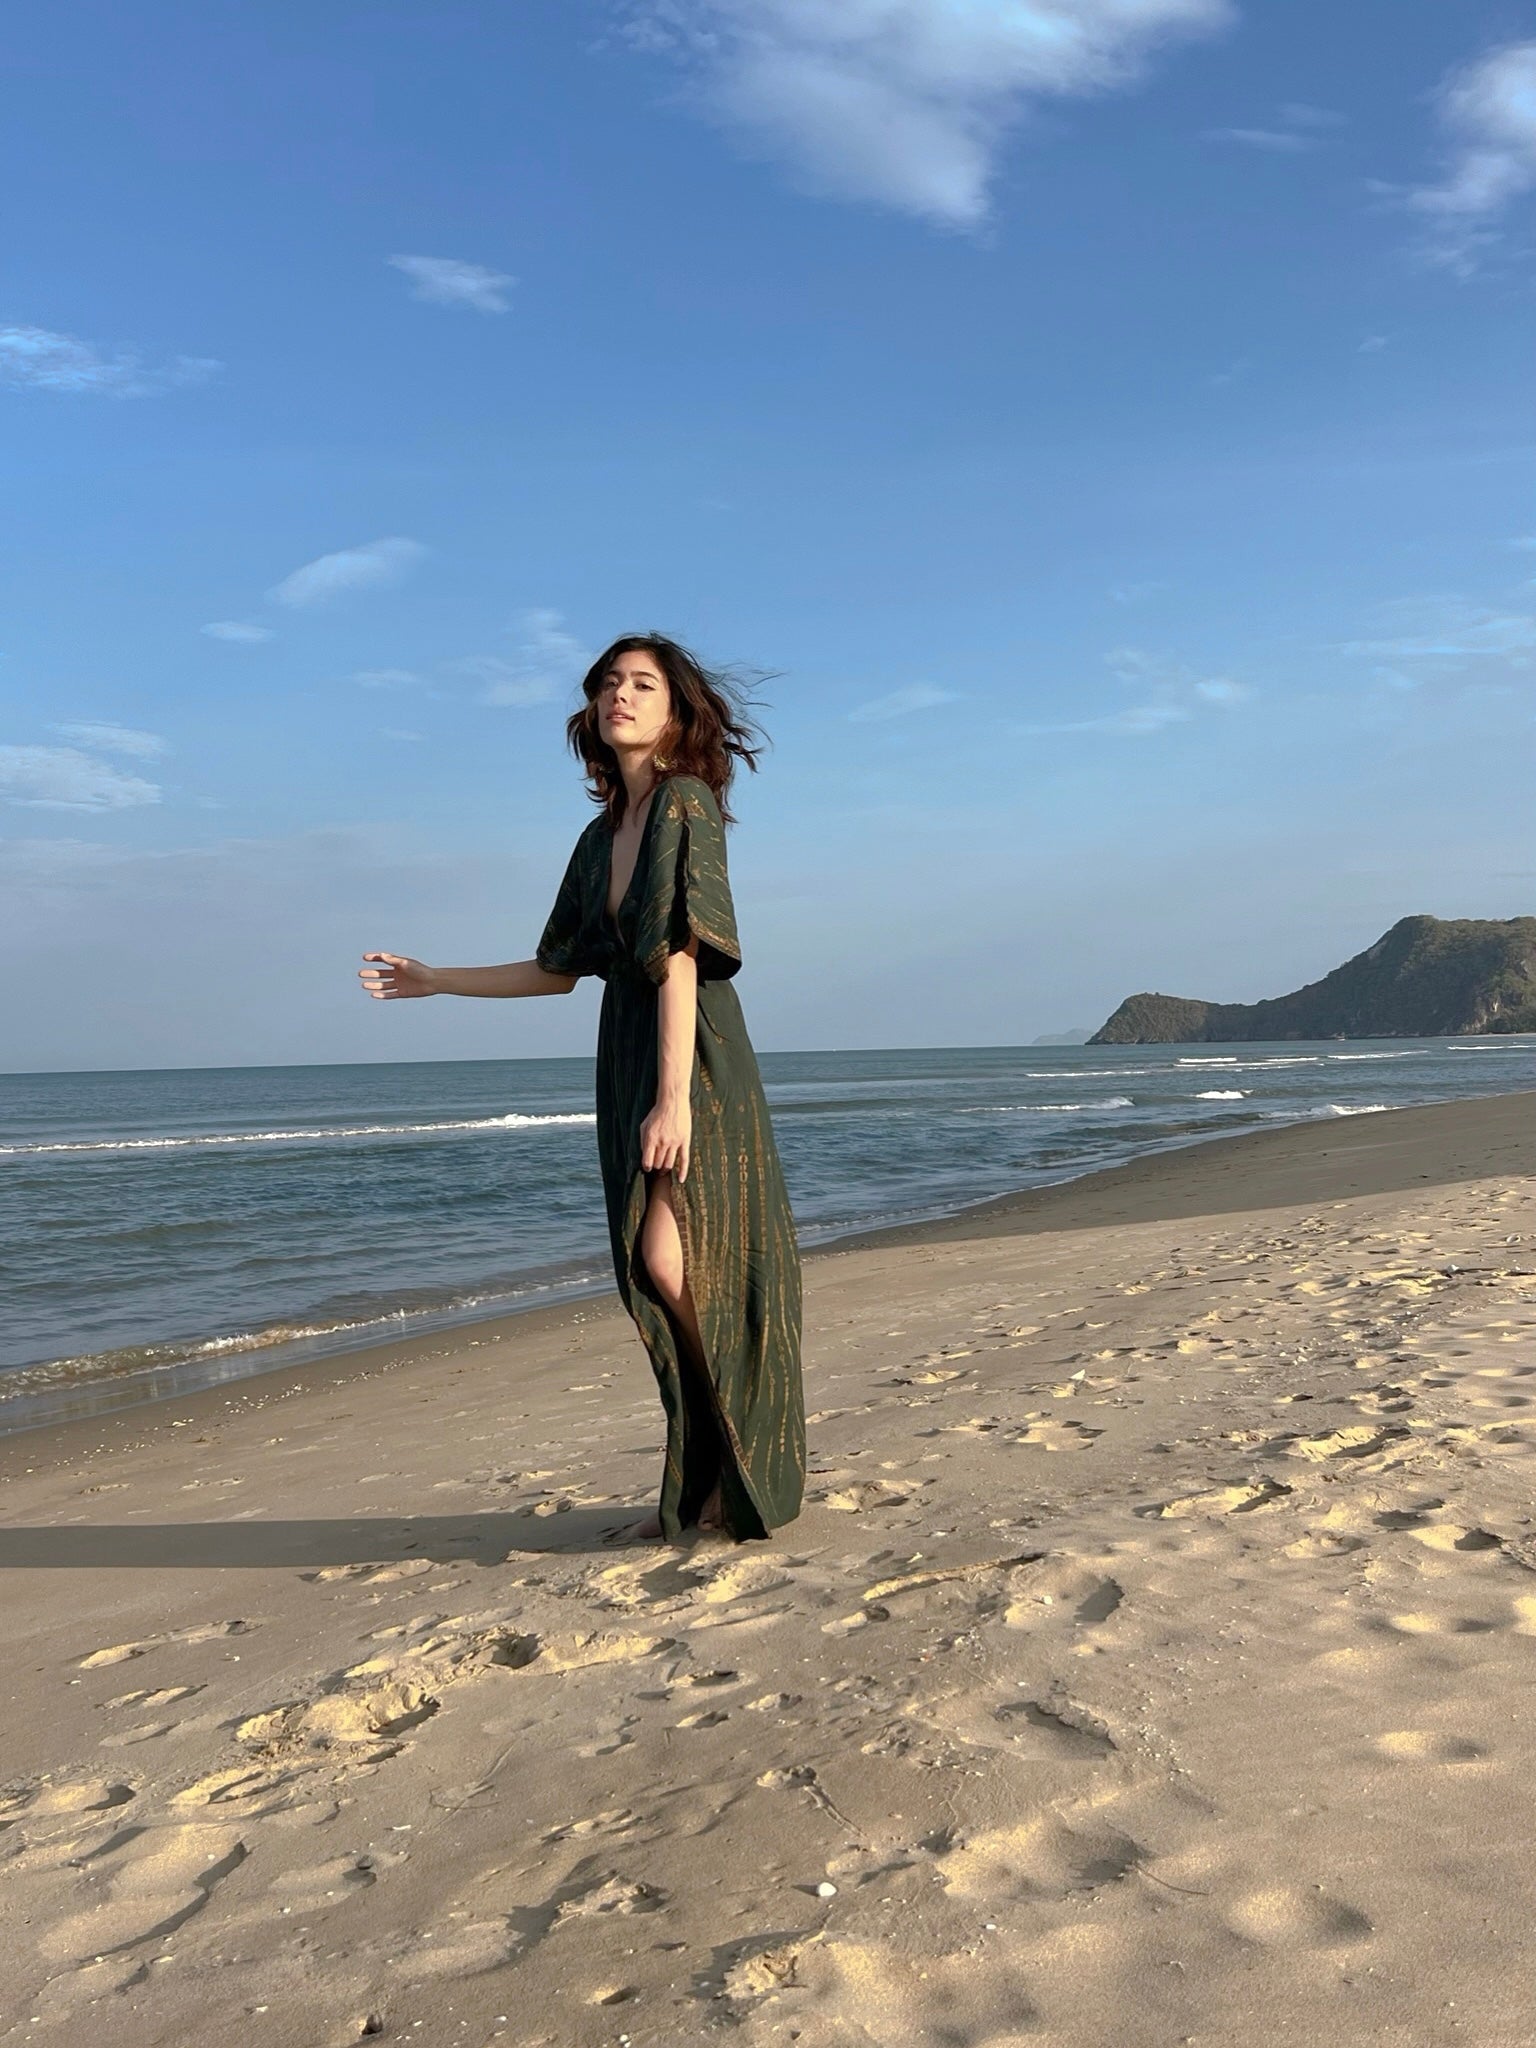 Green Goddess Tie-Dye Kaftan Maxi Dress: A captivating, airy long kaftan that ignites dreams of wind in your hair, the gentle sounds of ocean waves, and the sand beneath your feet. The perfect choice for a beach cover-up, beach dress, or resort dress on your vacation. Shop with Coco de Chom?